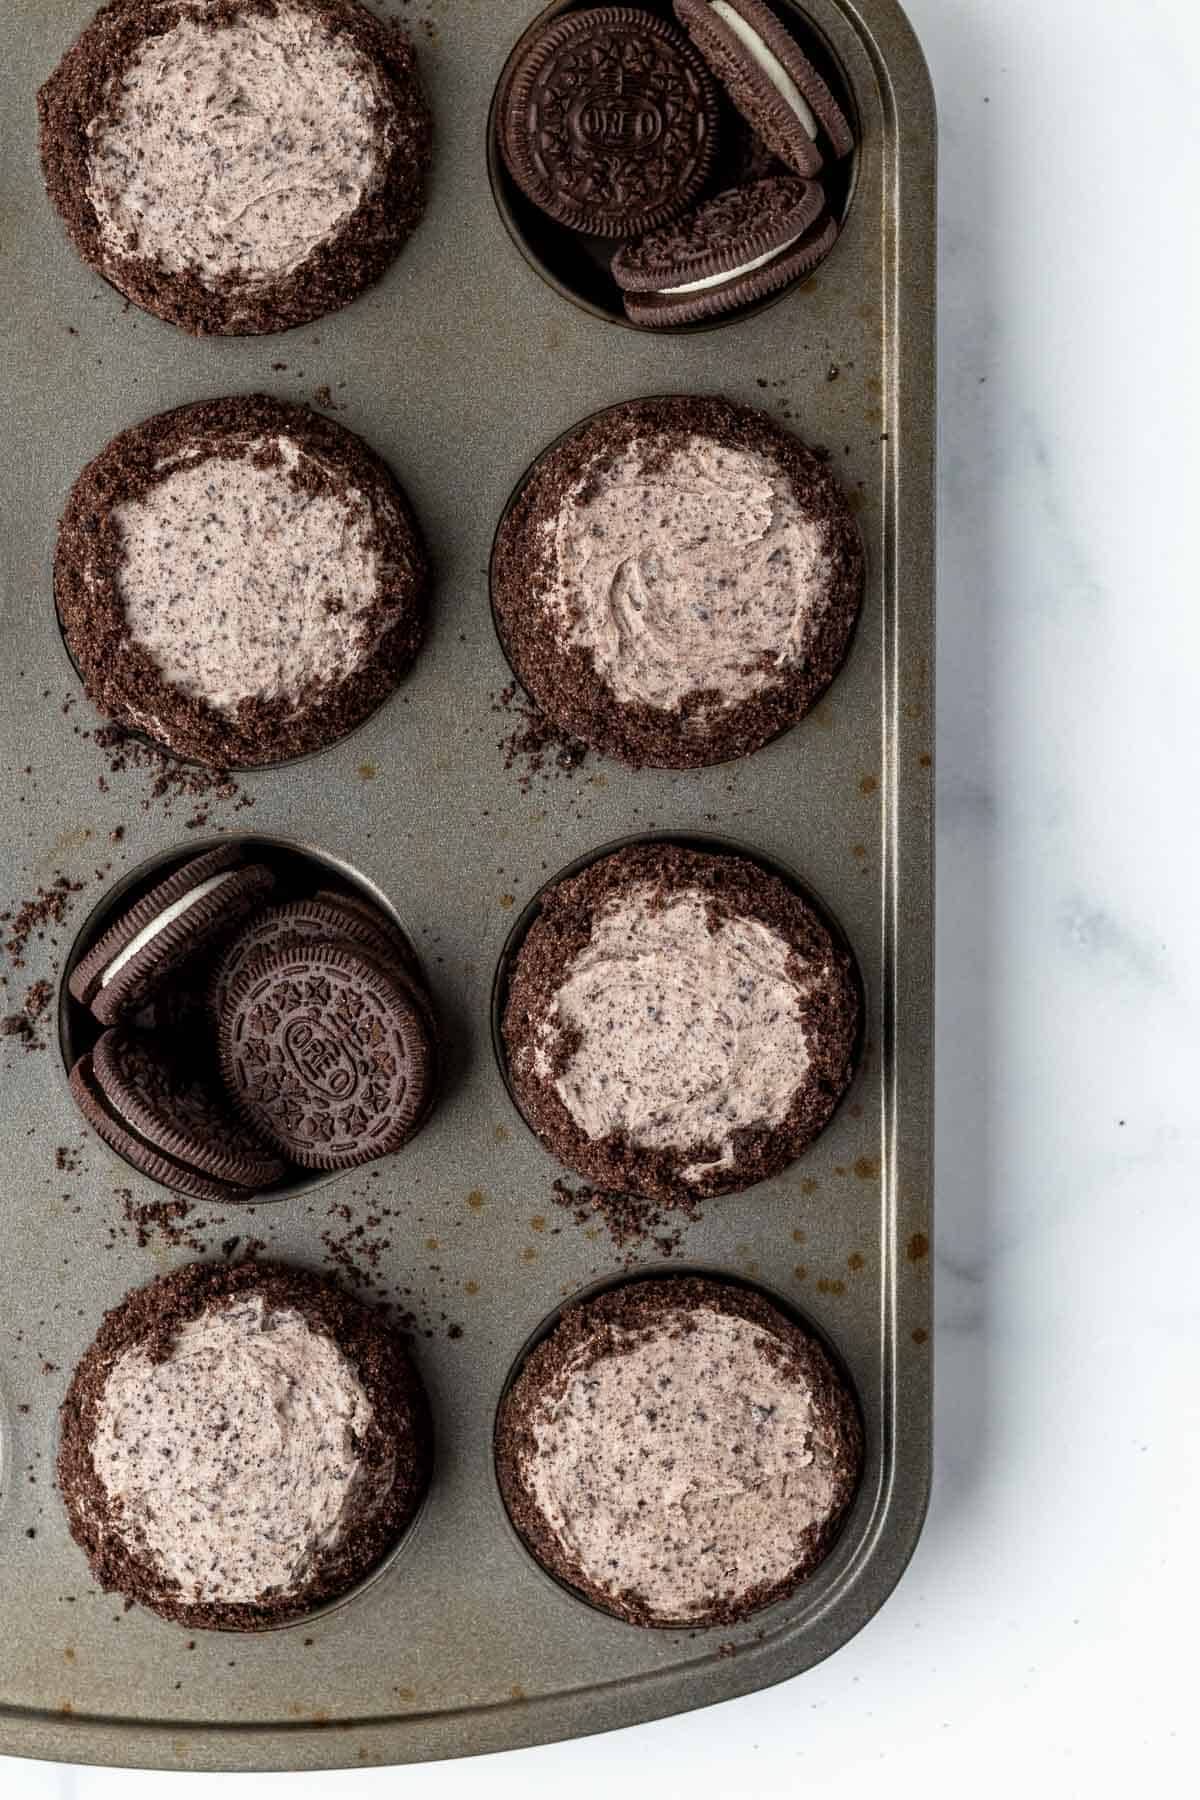 oreo cupcakes in cupcake tin with 2 tins filled with oreo cookies